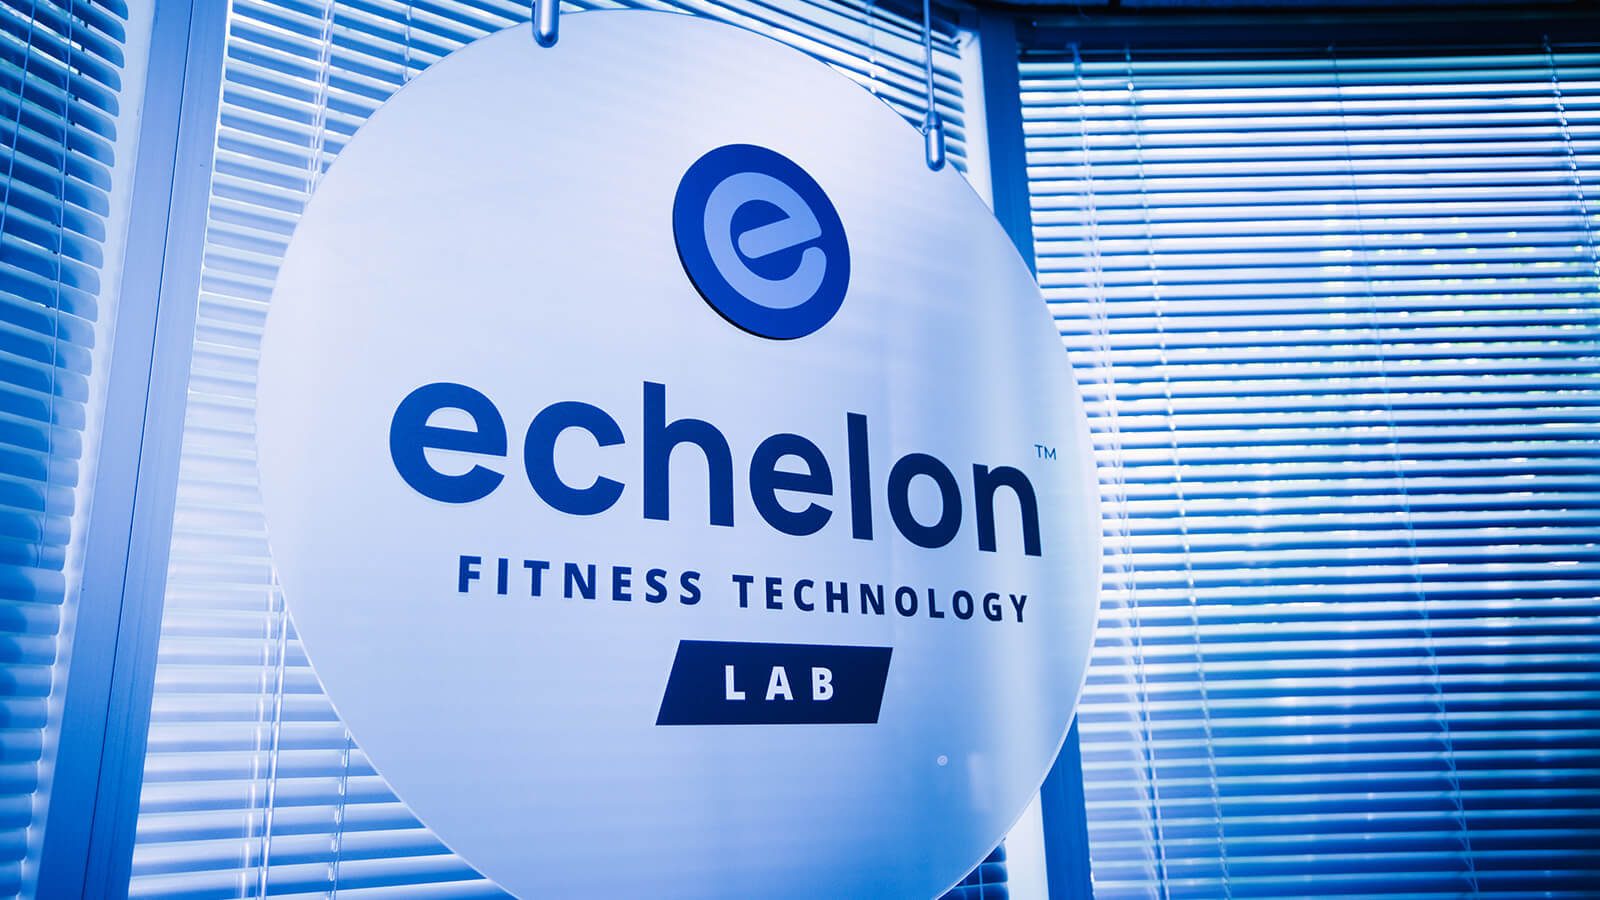 A photograph of a sign on door that reads "Echelon Fitness Technology Lab".